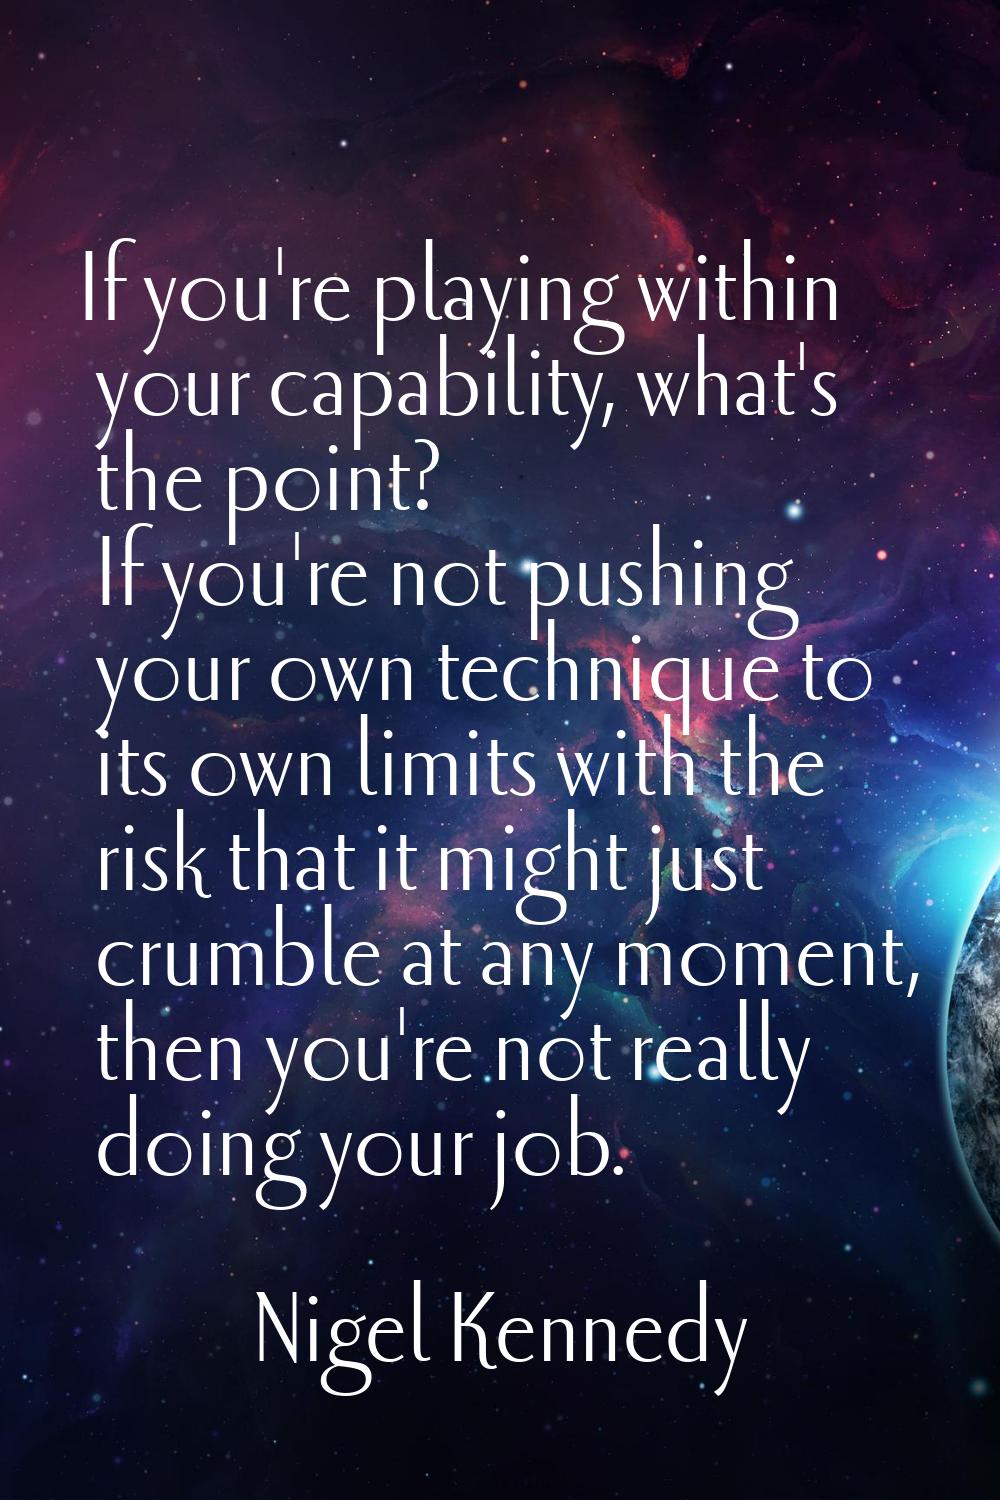 If you're playing within your capability, what's the point? If you're not pushing your own techniqu